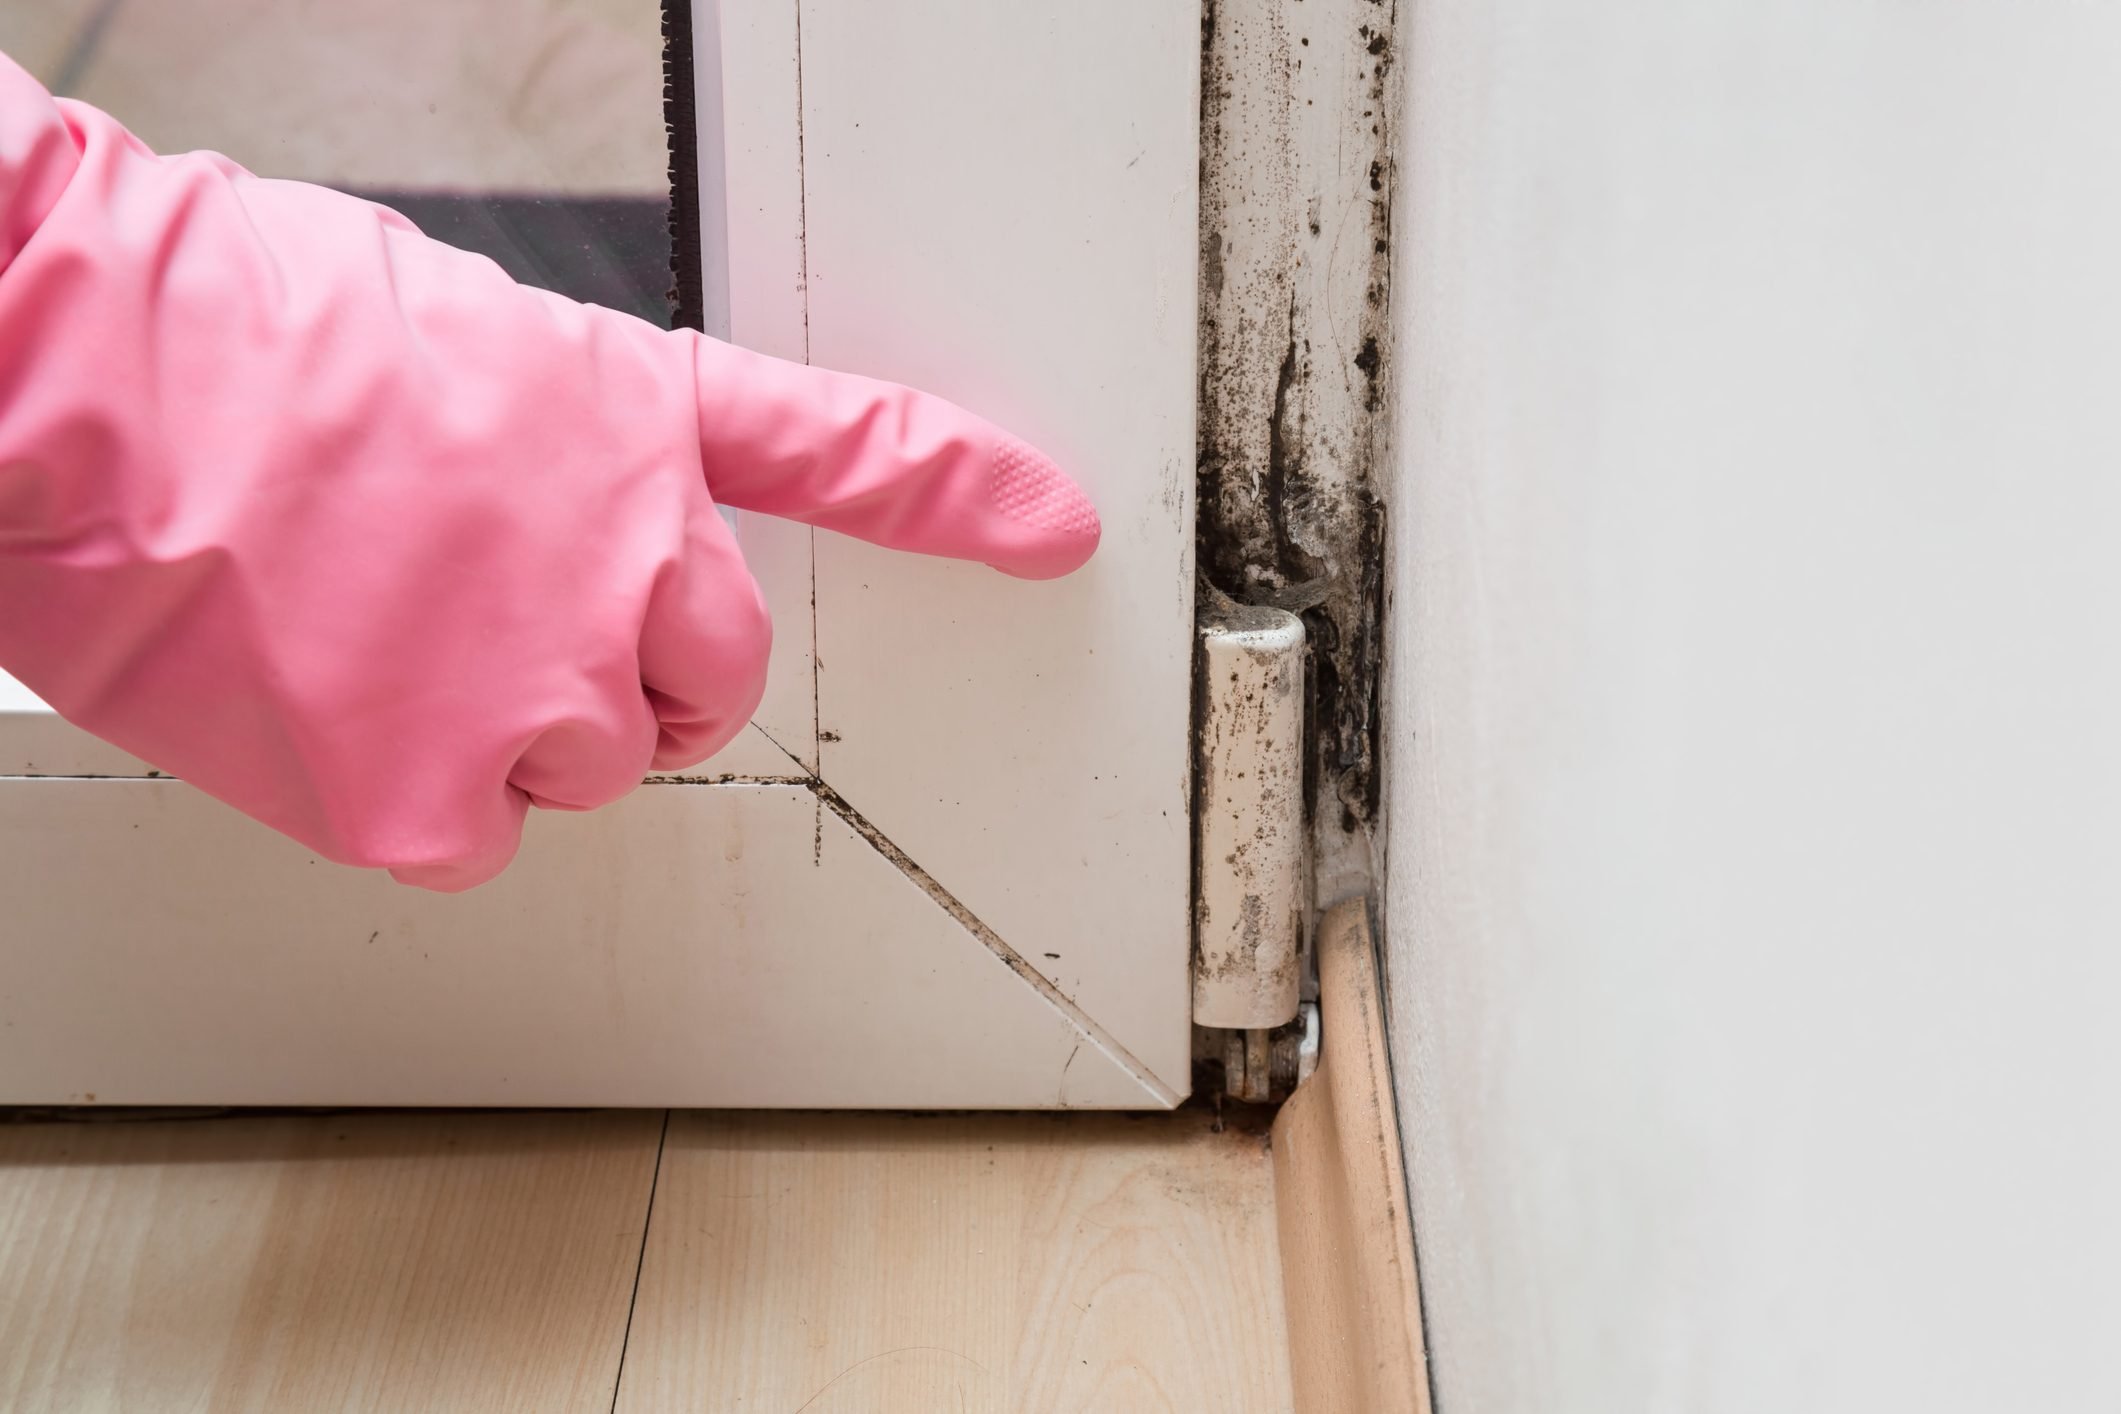 14 Health Effects of Mold in Your Home, from an Air Quality Scientist